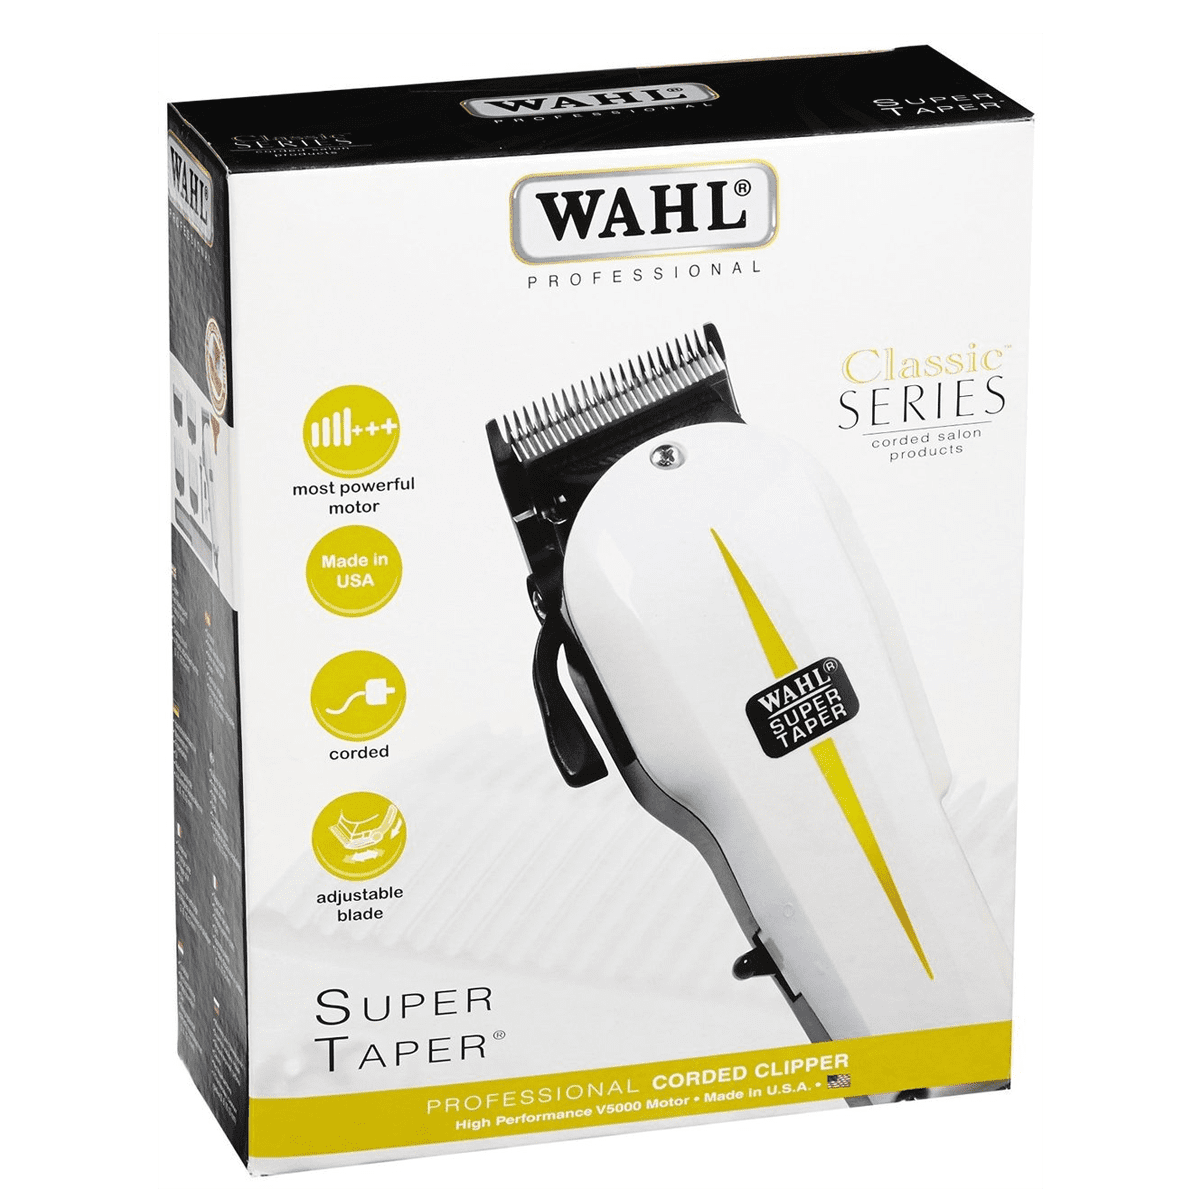 wahl professional classic series corded salon products